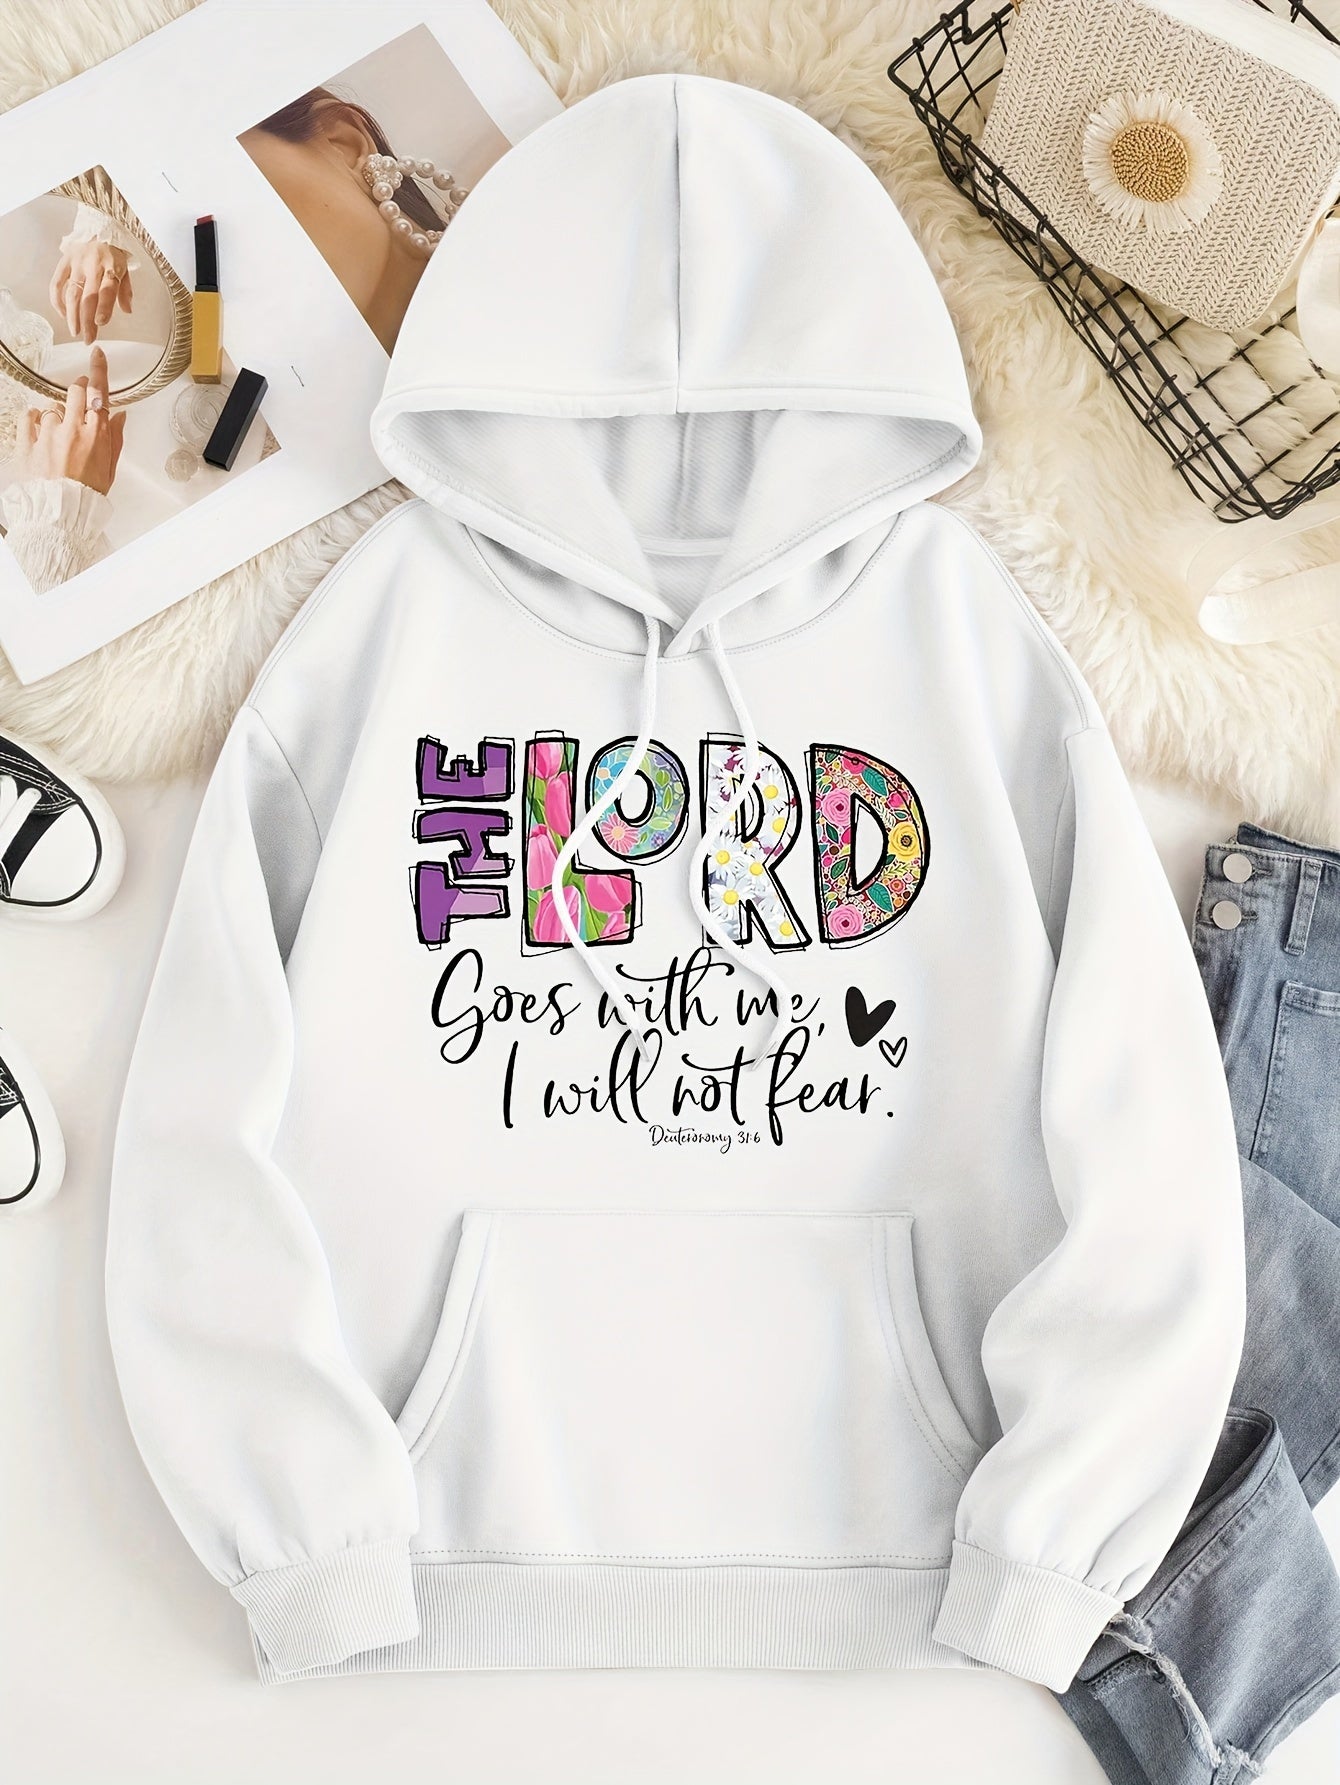 The Lord Goes With Me I Will Not Fear Women's Christian Pullover Hooded Sweatshirt claimedbygoddesigns